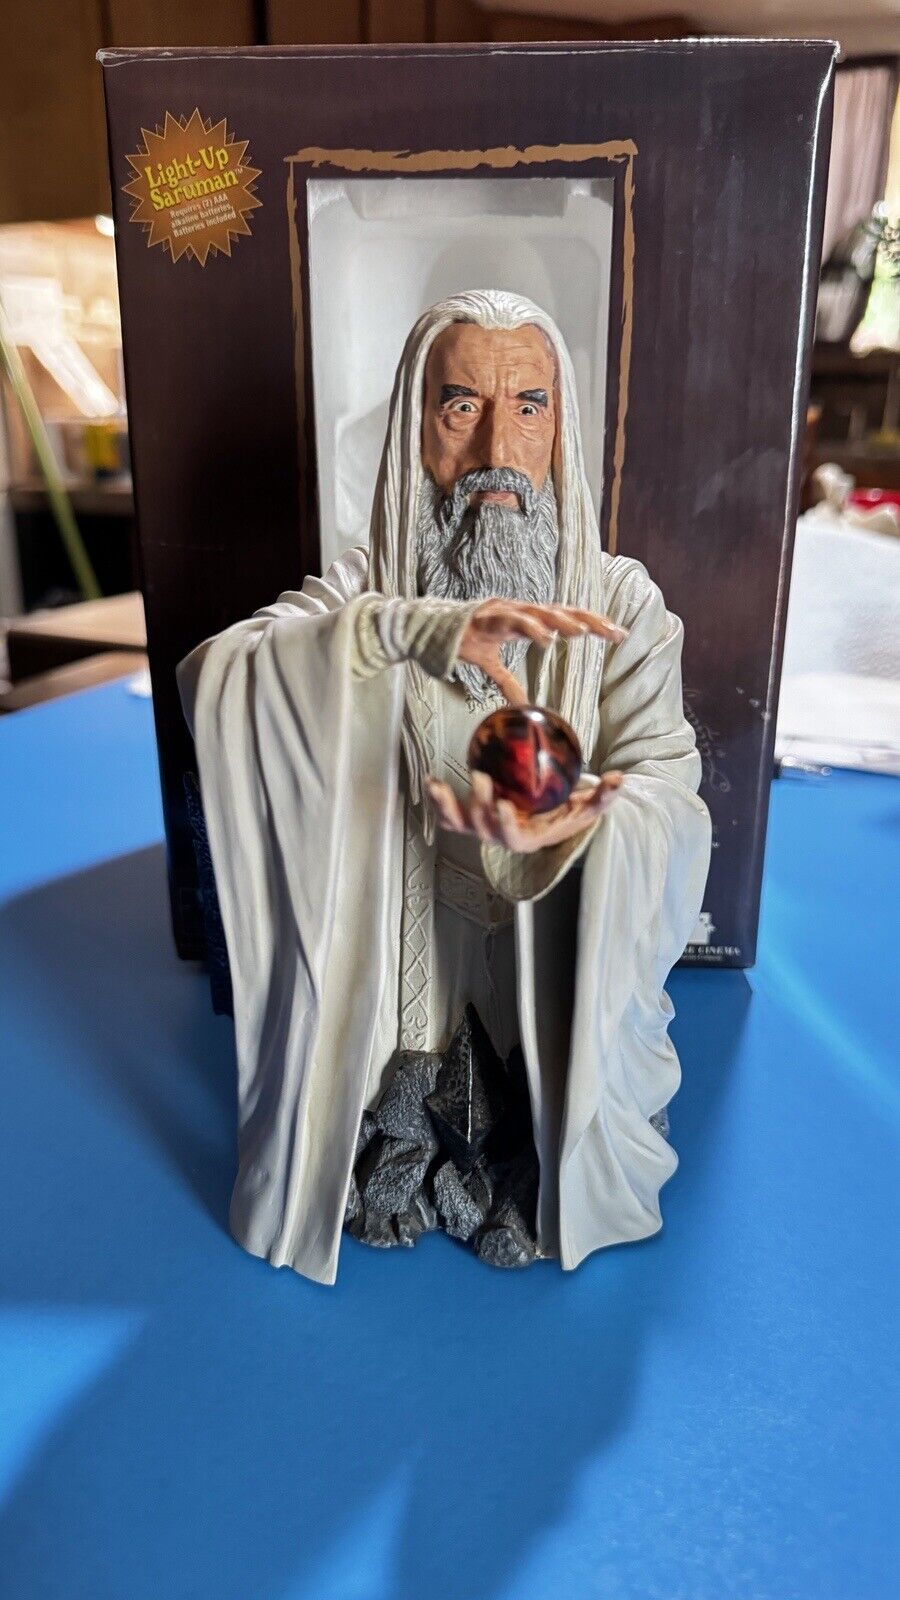 Lord of the Rings SARUMAN Mini Bust statue by Gentle Giant 794/3500 Rare 2007